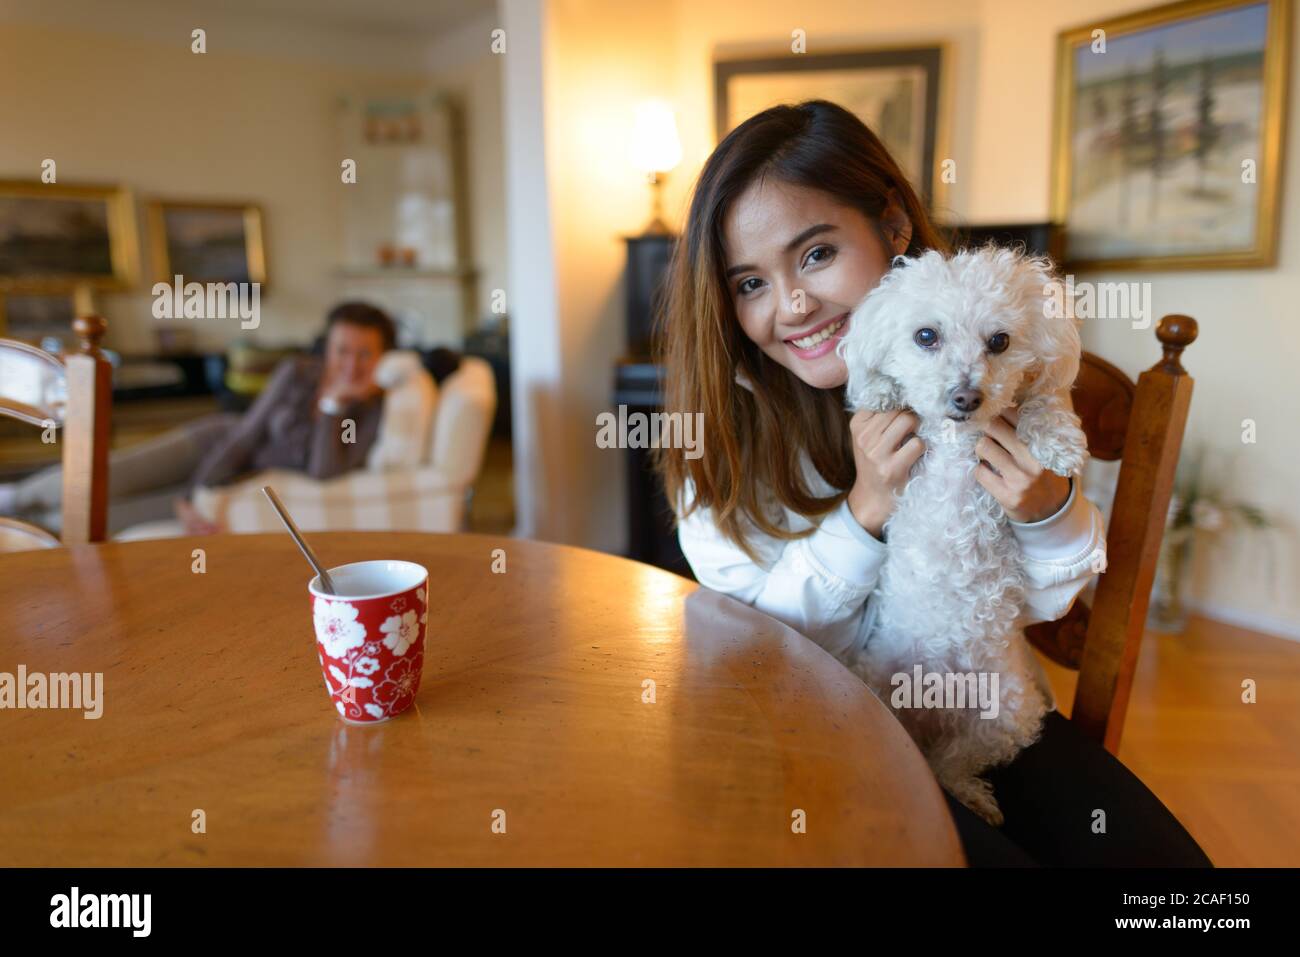 Young happy Asian woman smiling while holding cute dog inside comfortable home Stock Photo